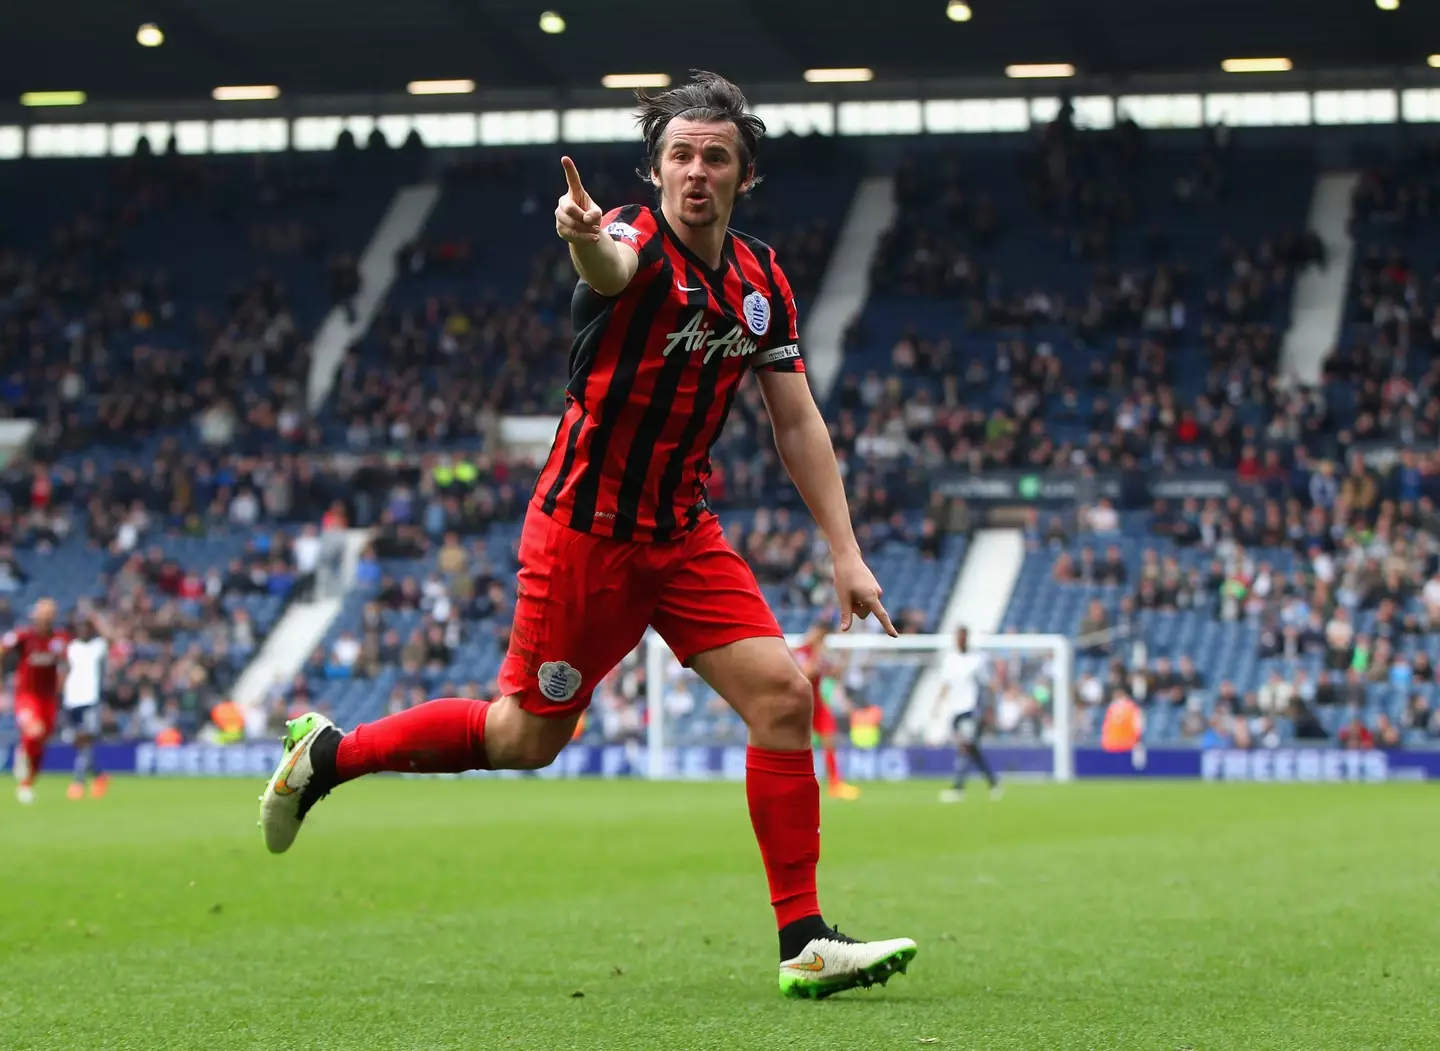 Barton played for the likes of QPR, Man City and Newcastle (Getty)